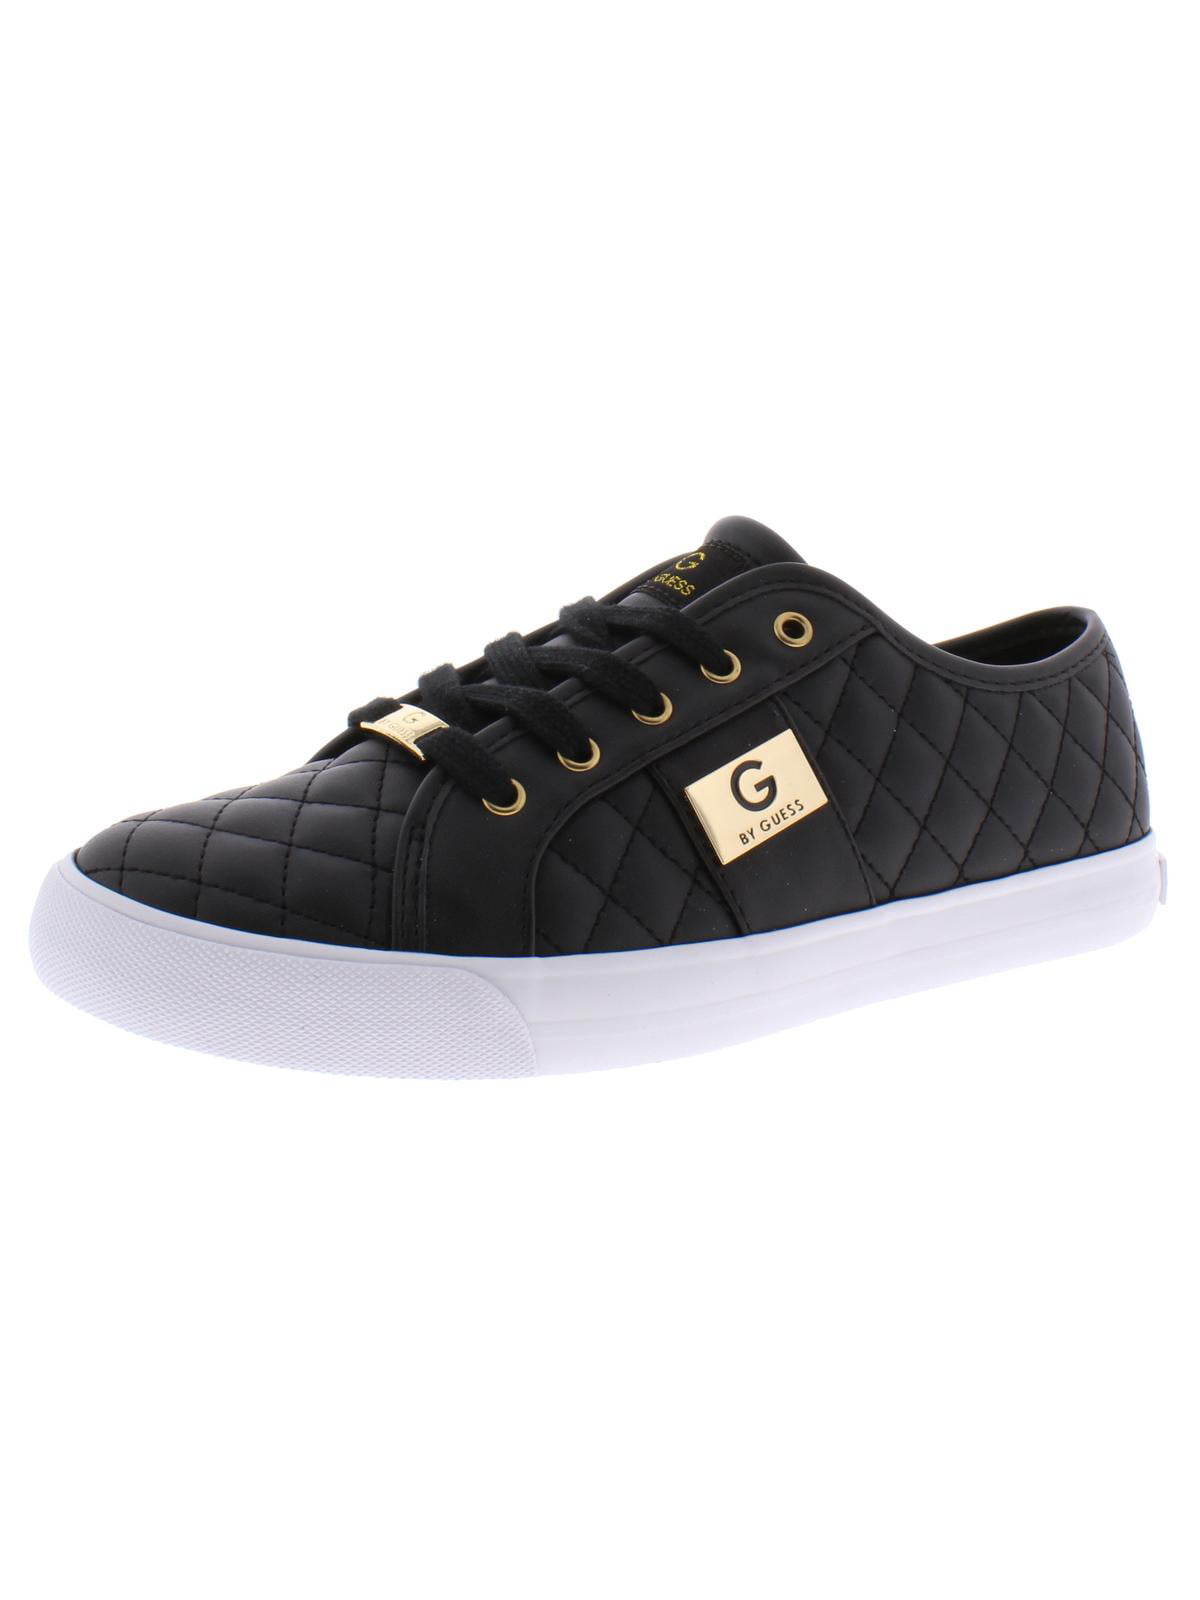 falskhed tragt announcer G by Guess Womens Backer 2 Quilted Fashion Sneakers Black 9 Medium (B,M) -  Walmart.com